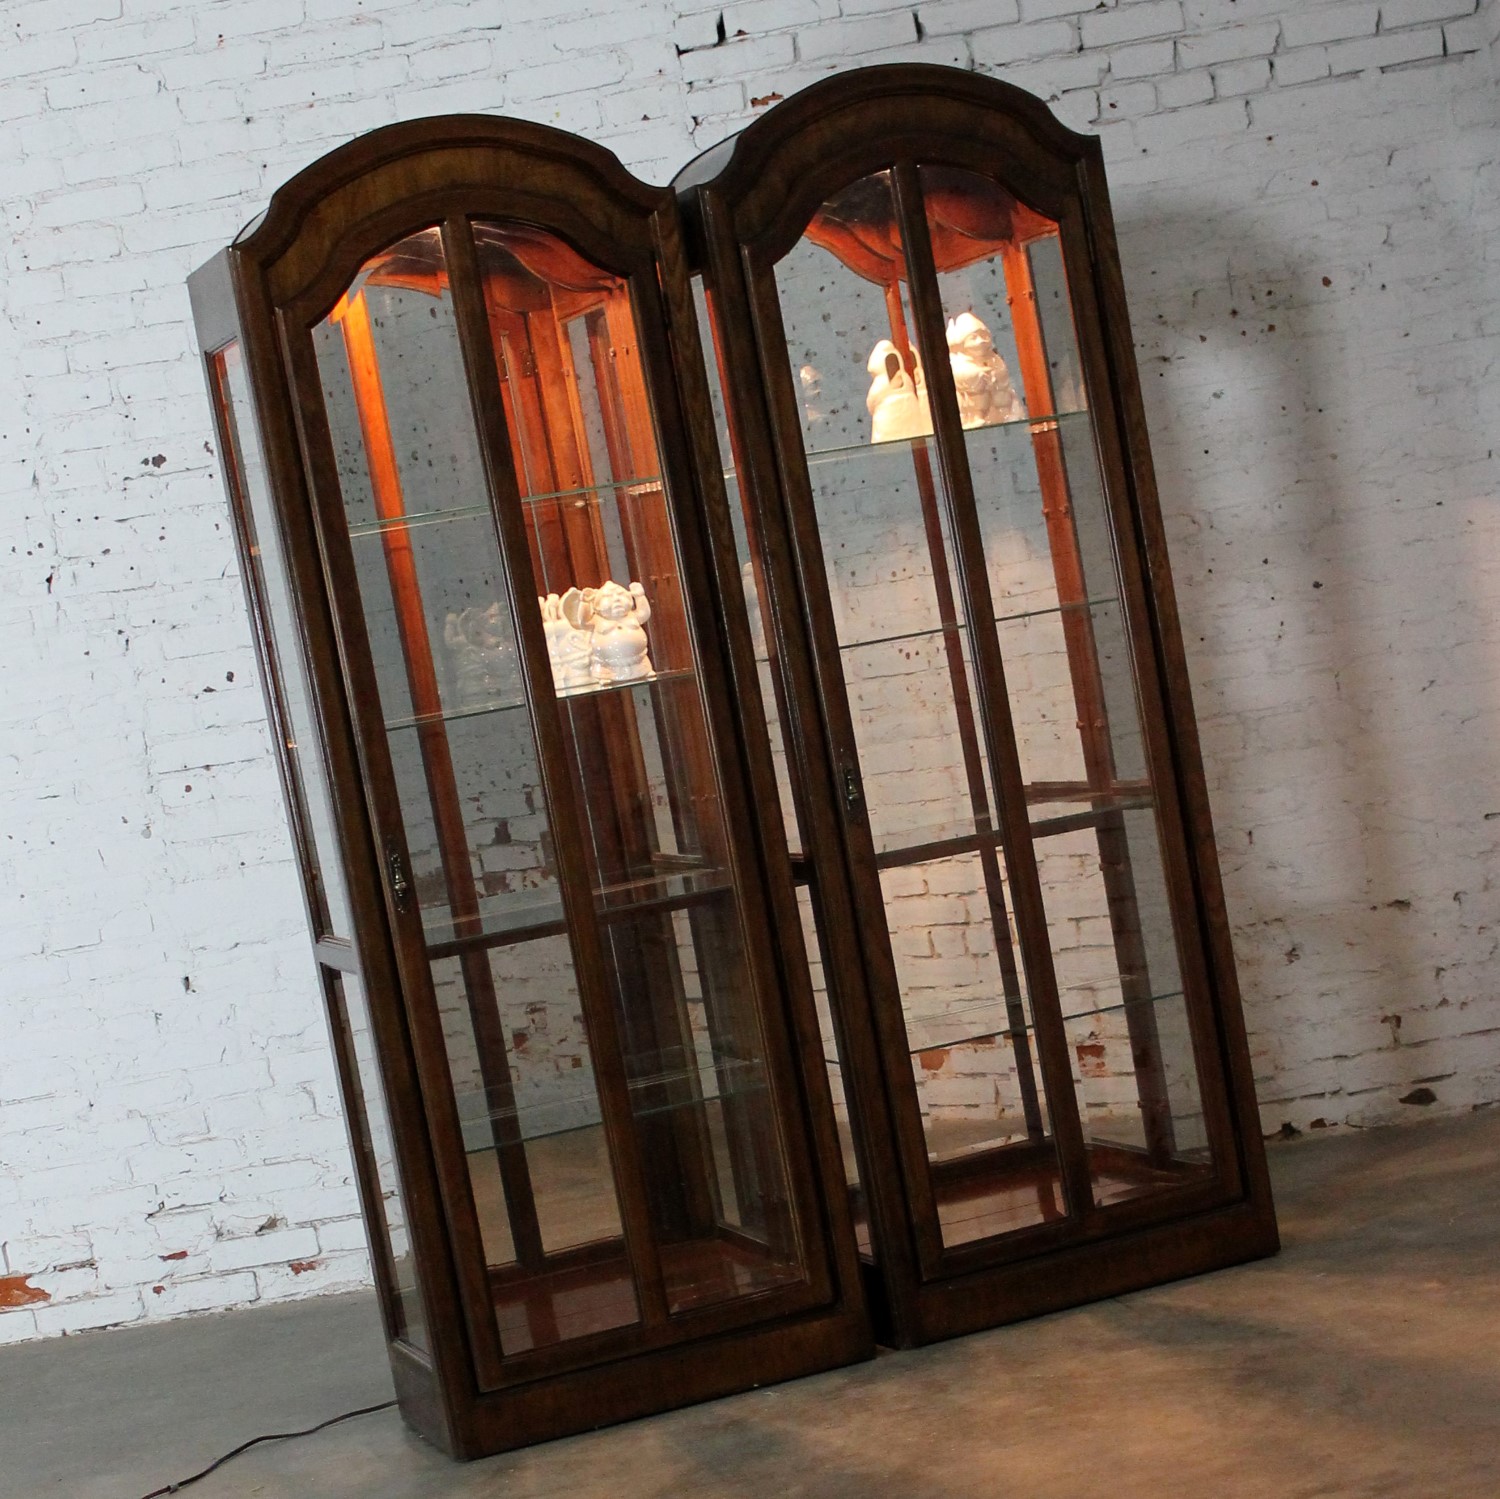 Lighted Curio Cabinets with Arched Top in Dark Wood a Vintage Pair